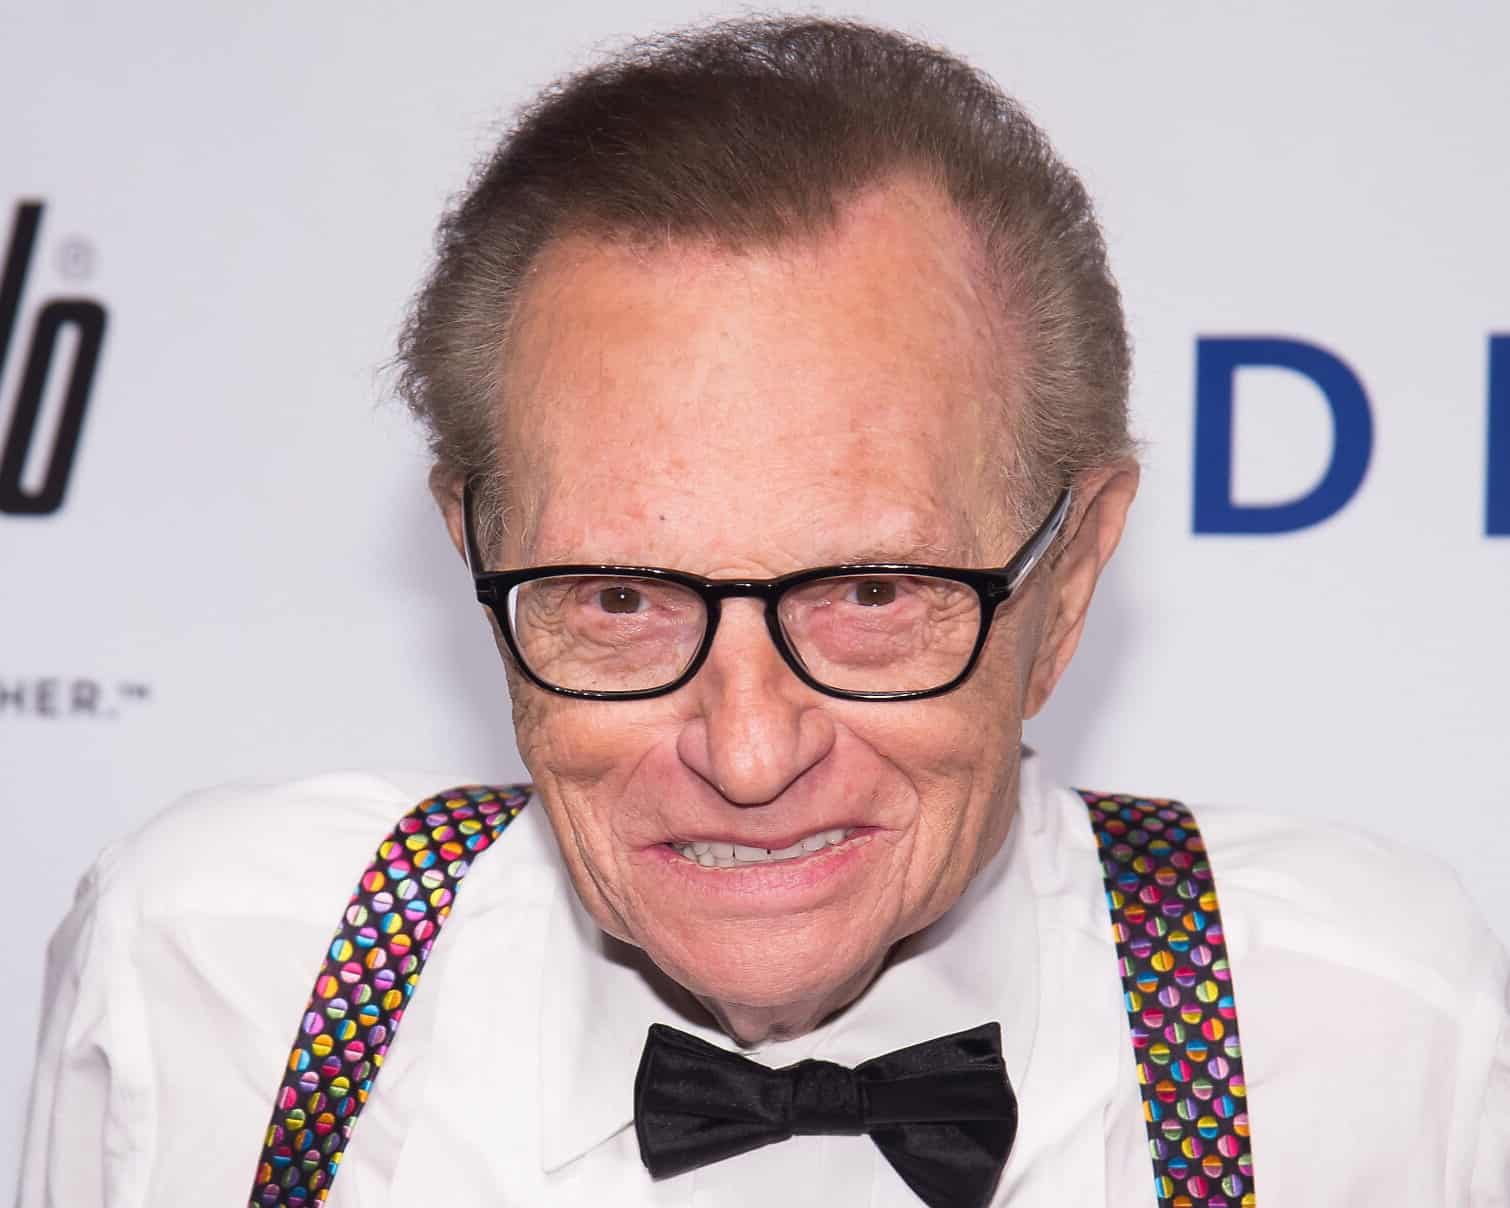 Larry King's net worth is approximately $50 million at the time of his death